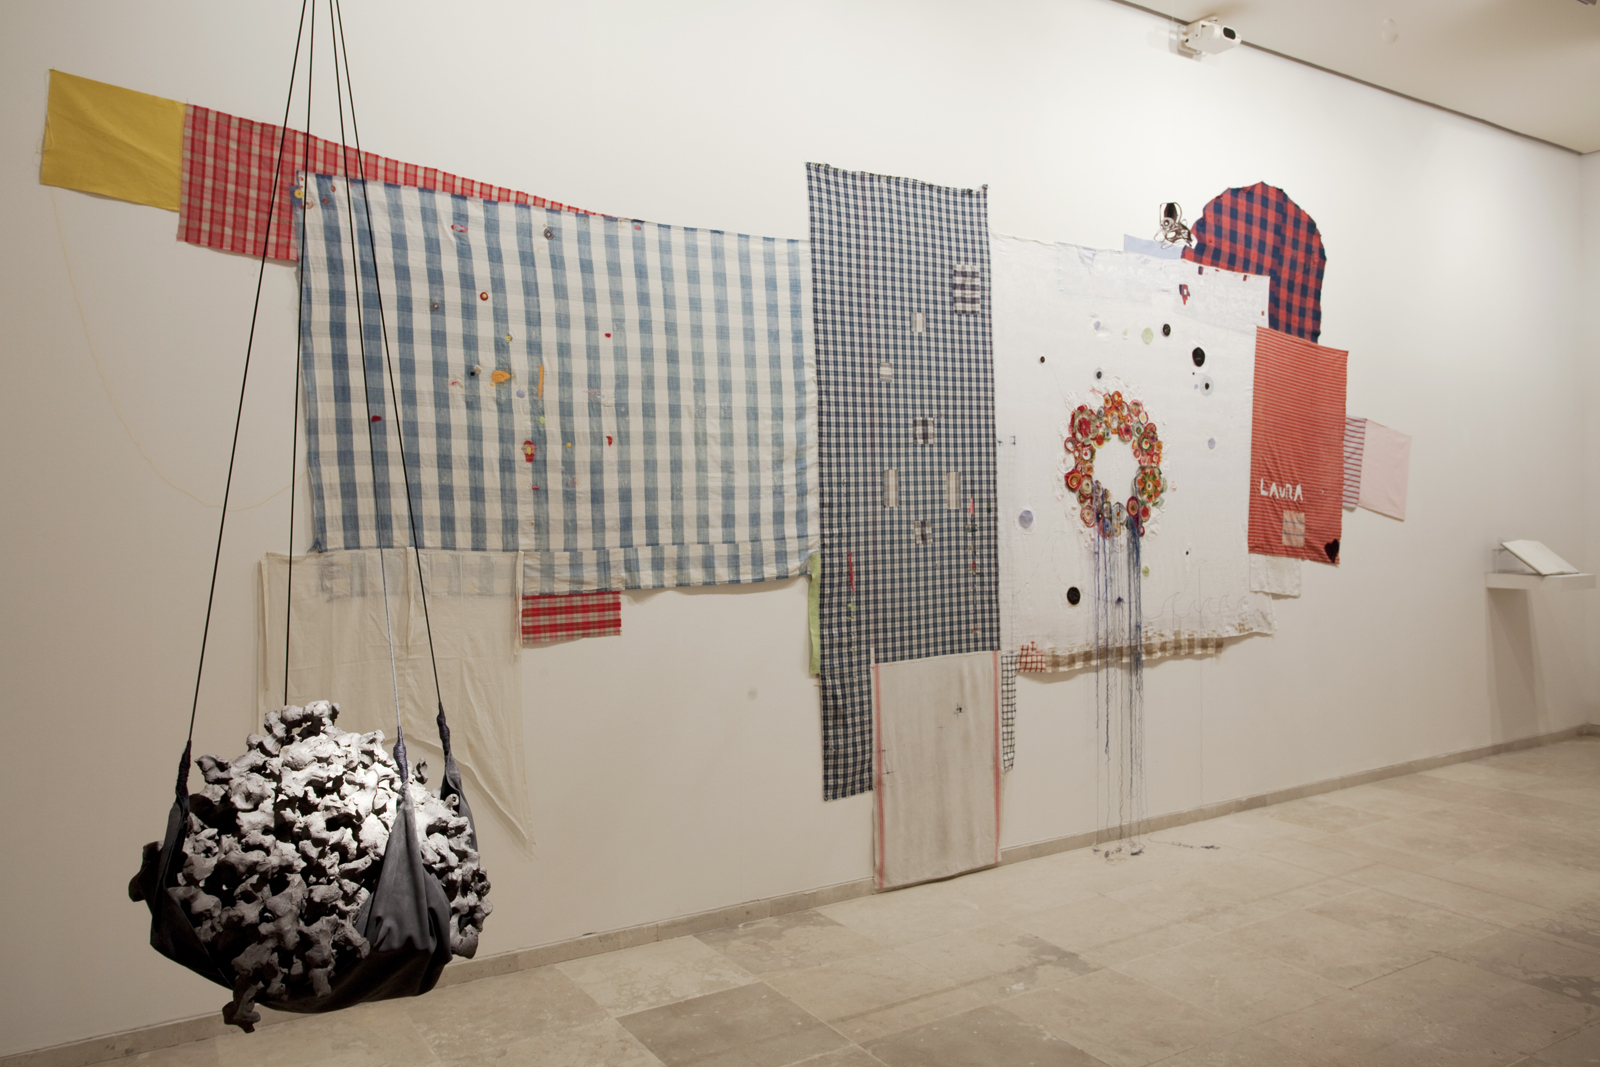 <p>Laura at the dinner table (2013), darned/ embroidered family linens and drawing journal, 300cm x 500 cm;<br />
The Making of Us (2012), black clay, rope, and leather, 60cm diam.</p>
